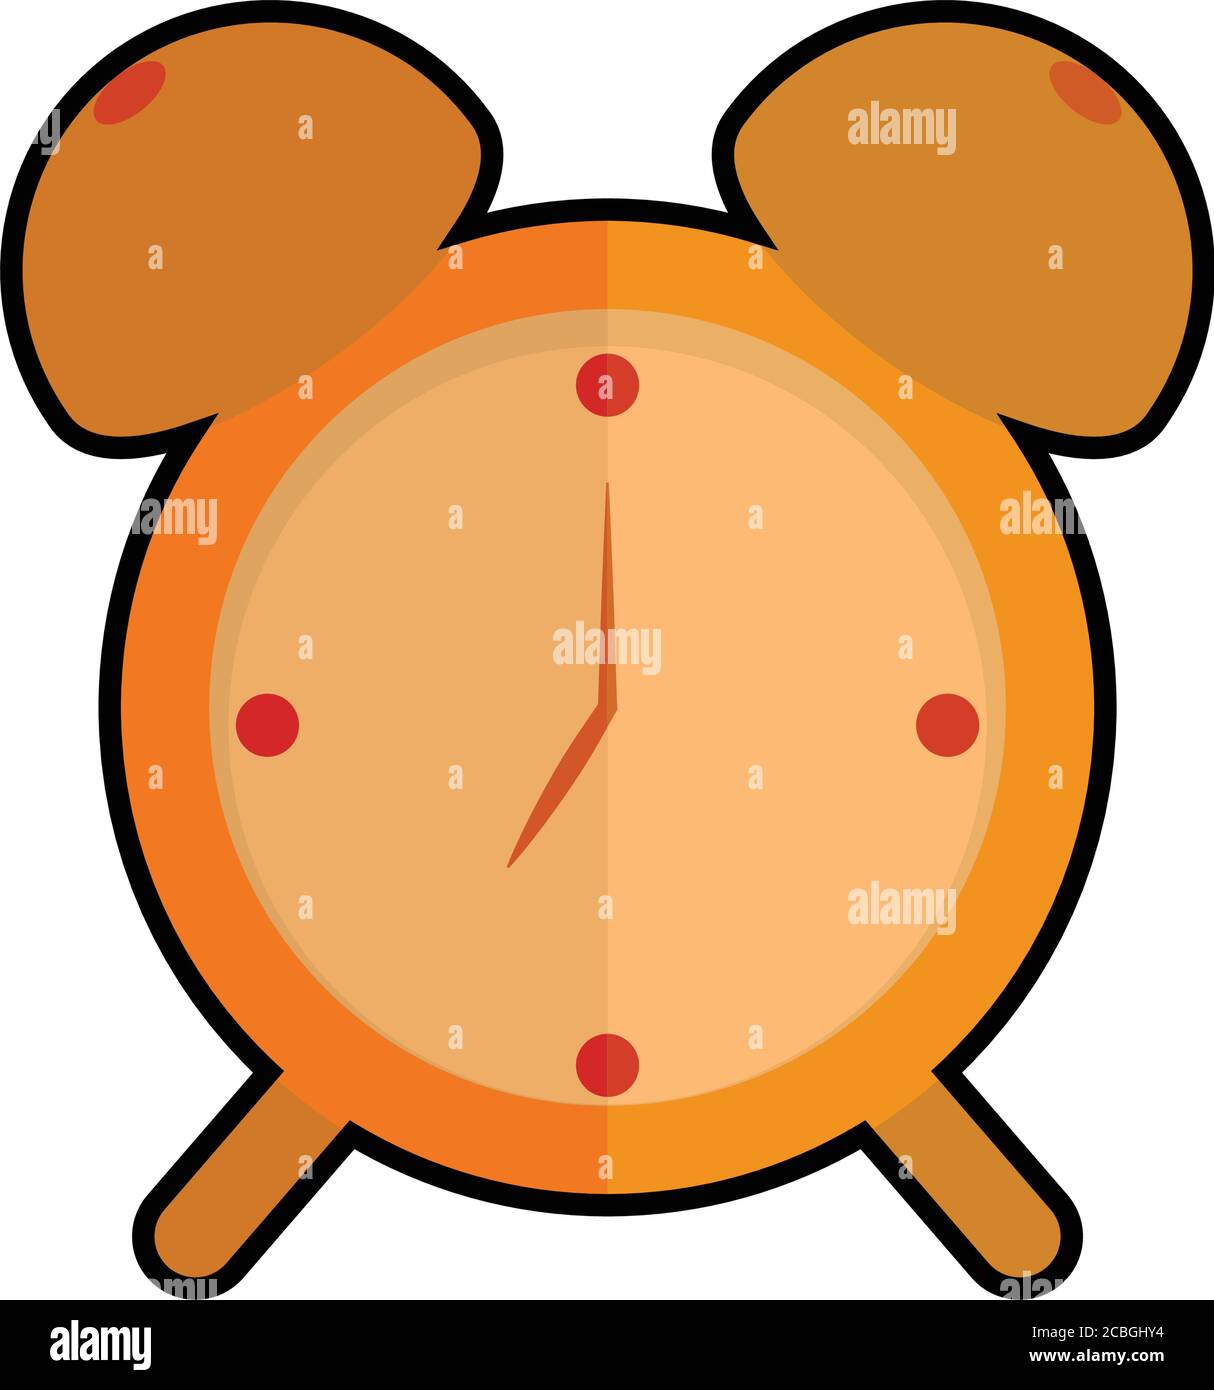 Isolated ornage alarm clock icon Stock Vector